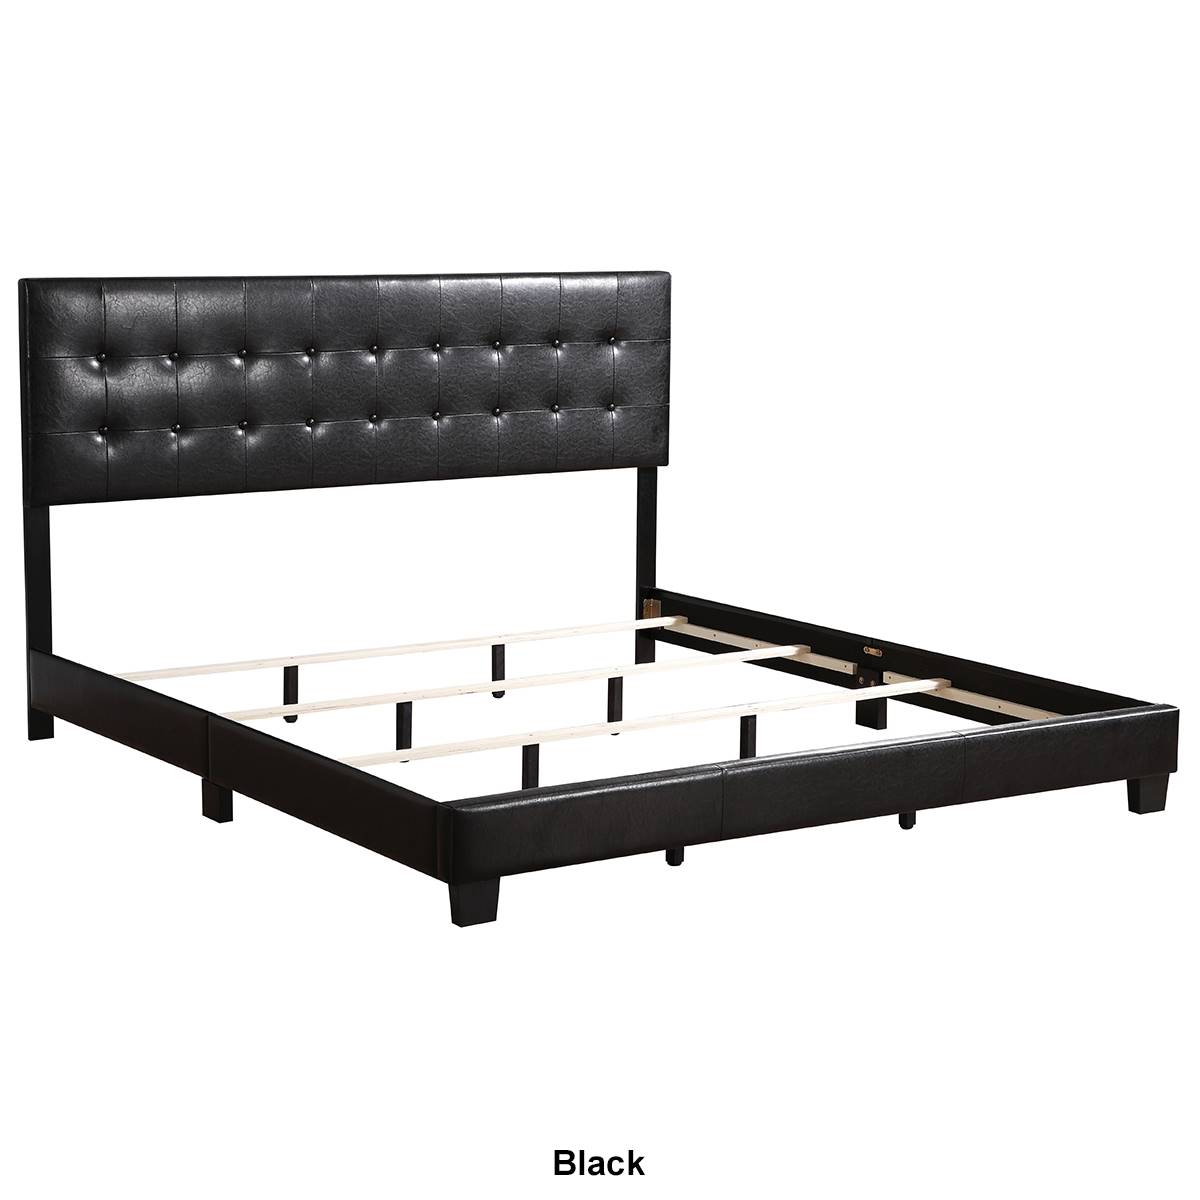 Passion Furniture Caldwell Panel Bed Frame - Full